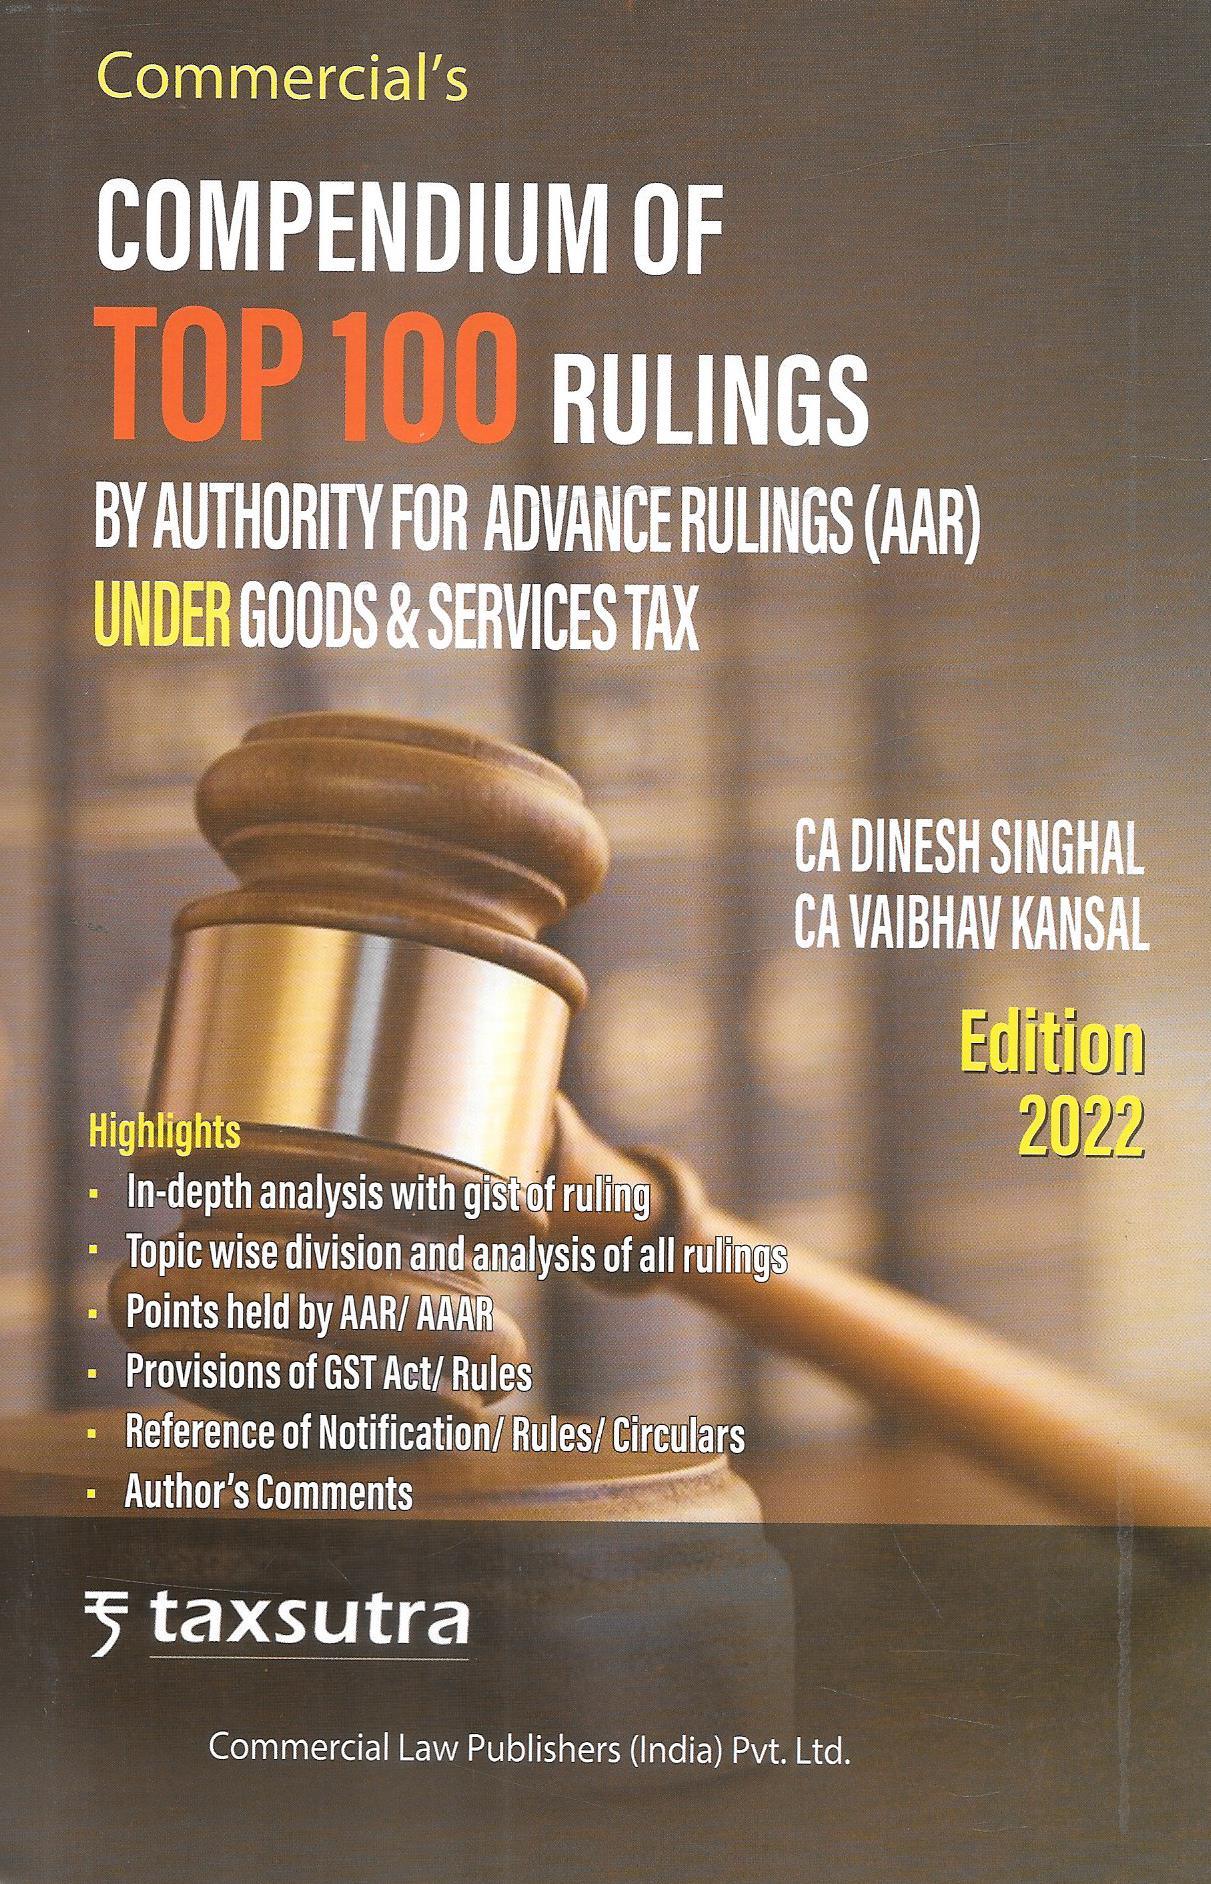 Compendium Of Top 100 Rulings By Authority For Advance Rulings (AAR) Under Goods & Services Tax - M&J Services